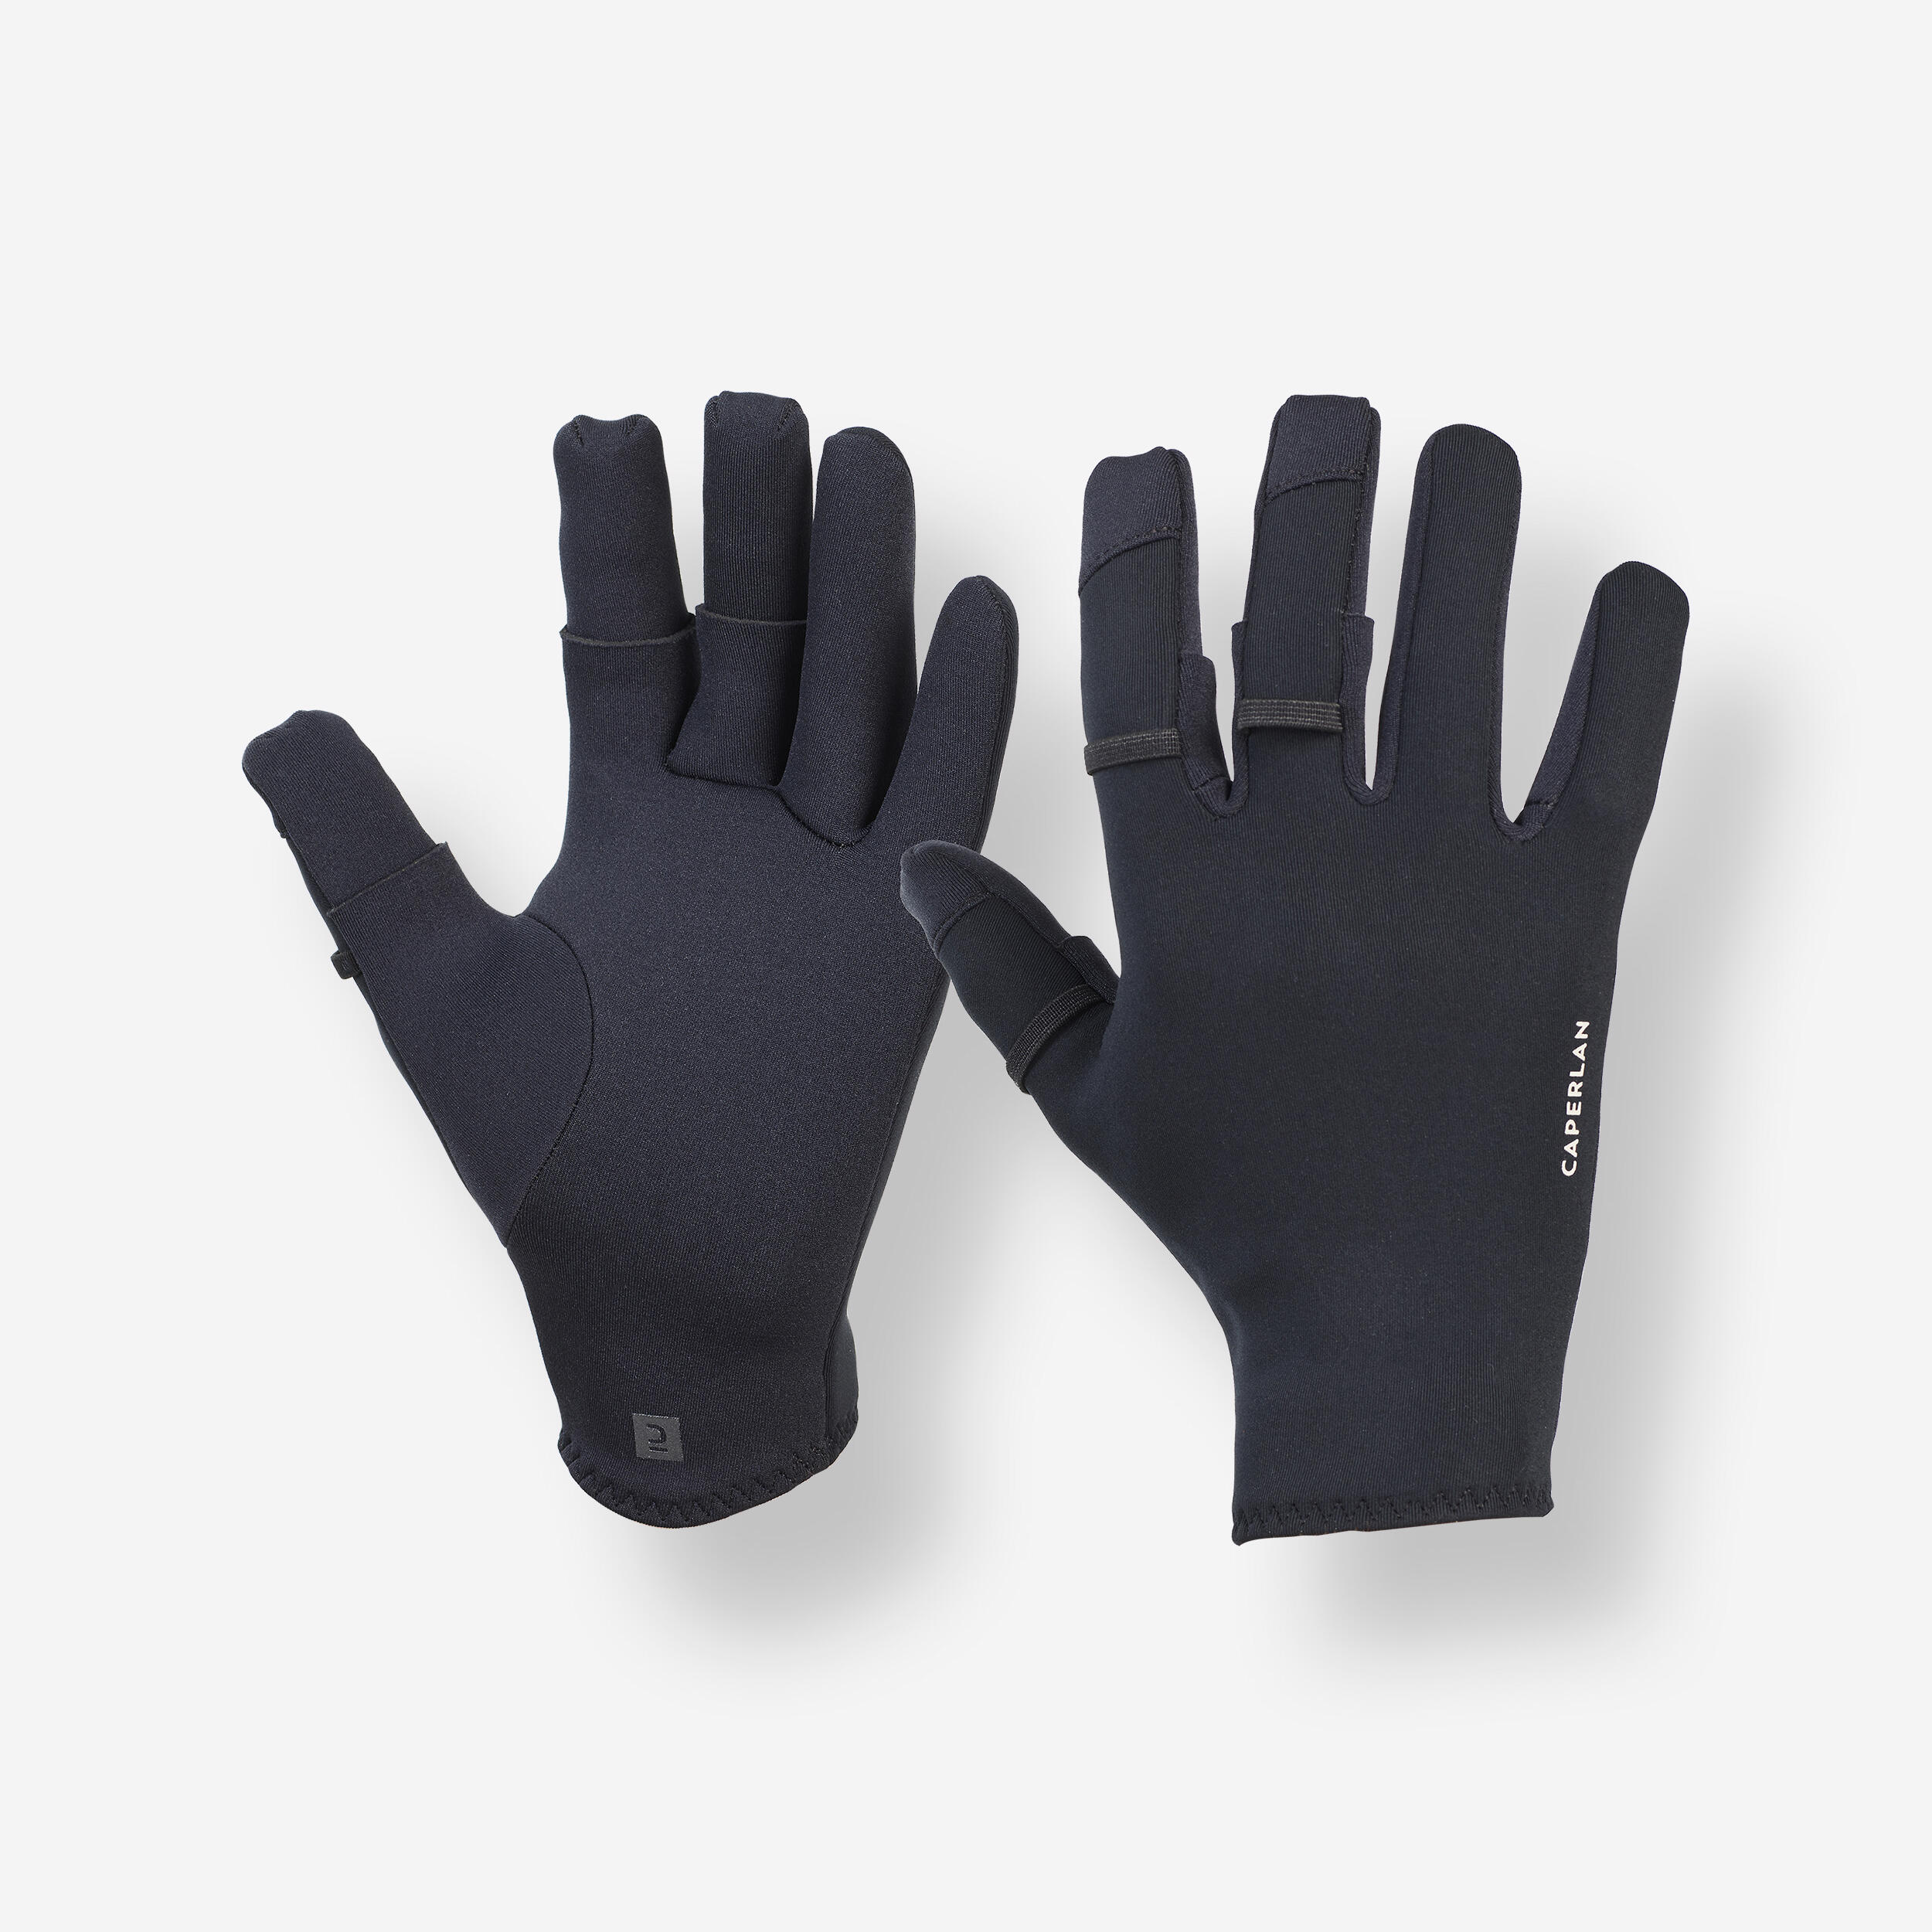 Fishing Neoprene Gloves Thermo with Three Opening Fingers 1 mm - 500 Black - CAPERLAN